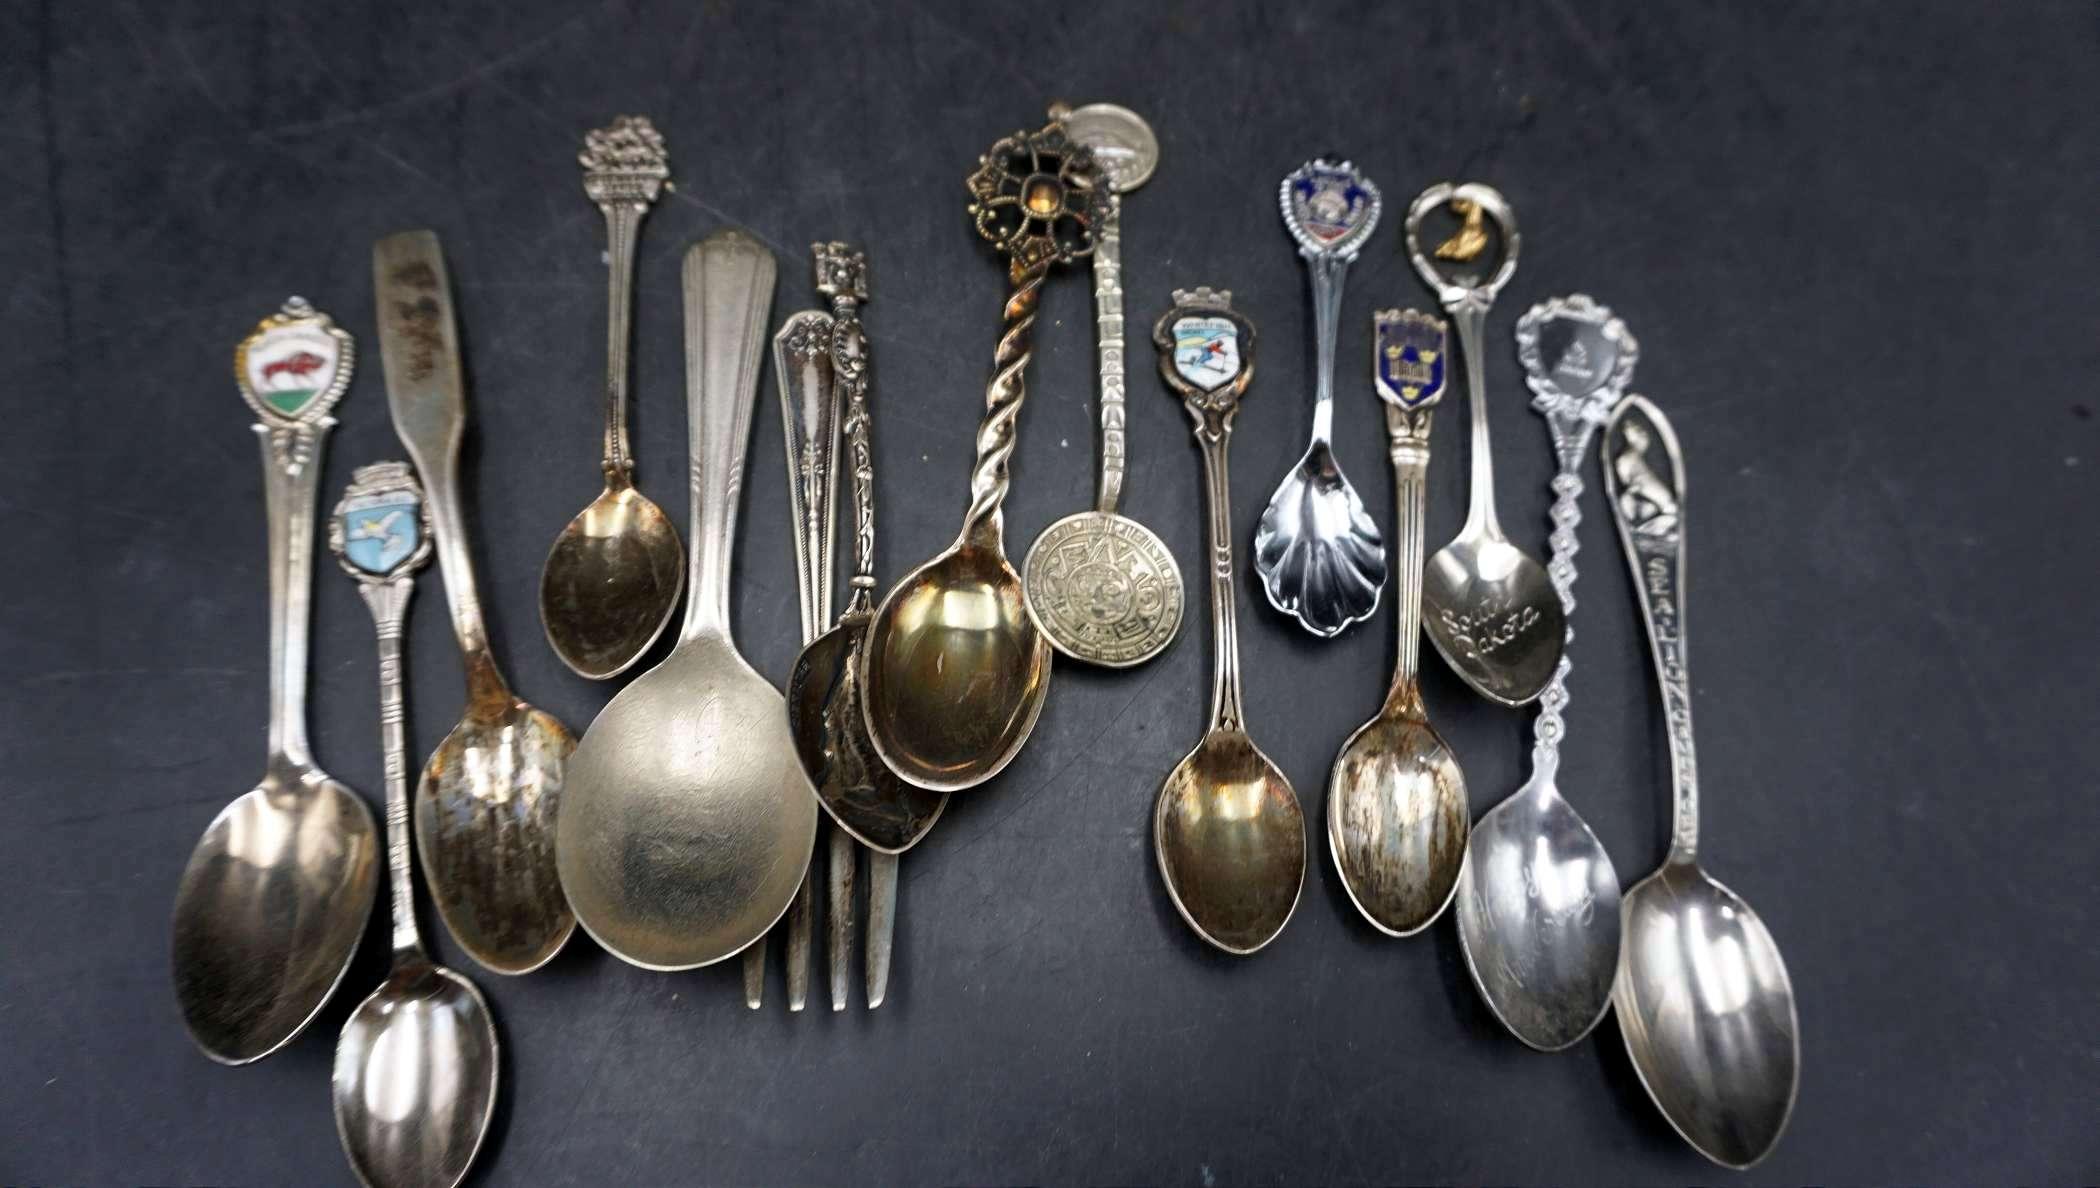 Collector Spoons & Fork